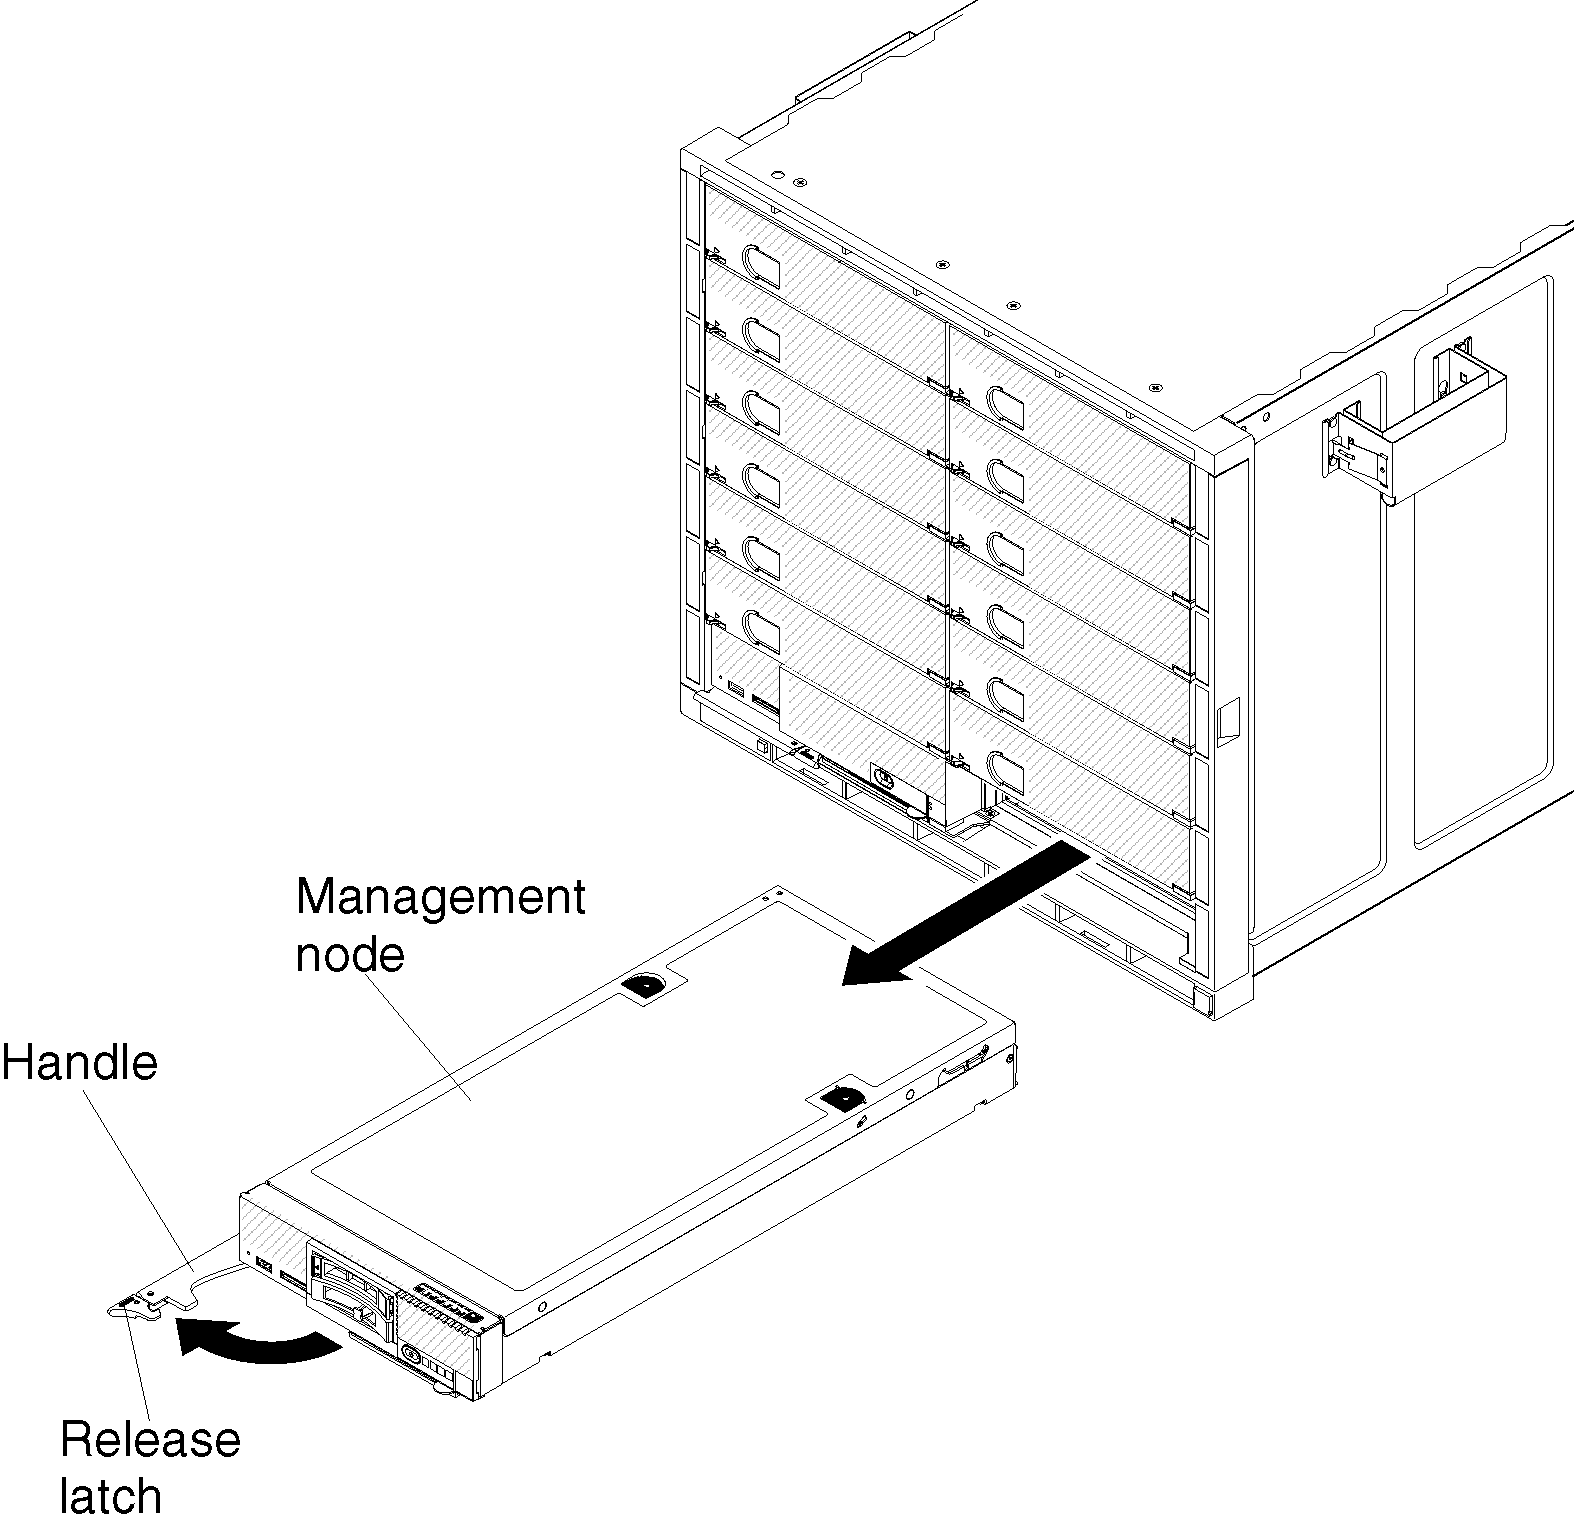 Graphic showing the removal of an Flex System Manager from the chassis